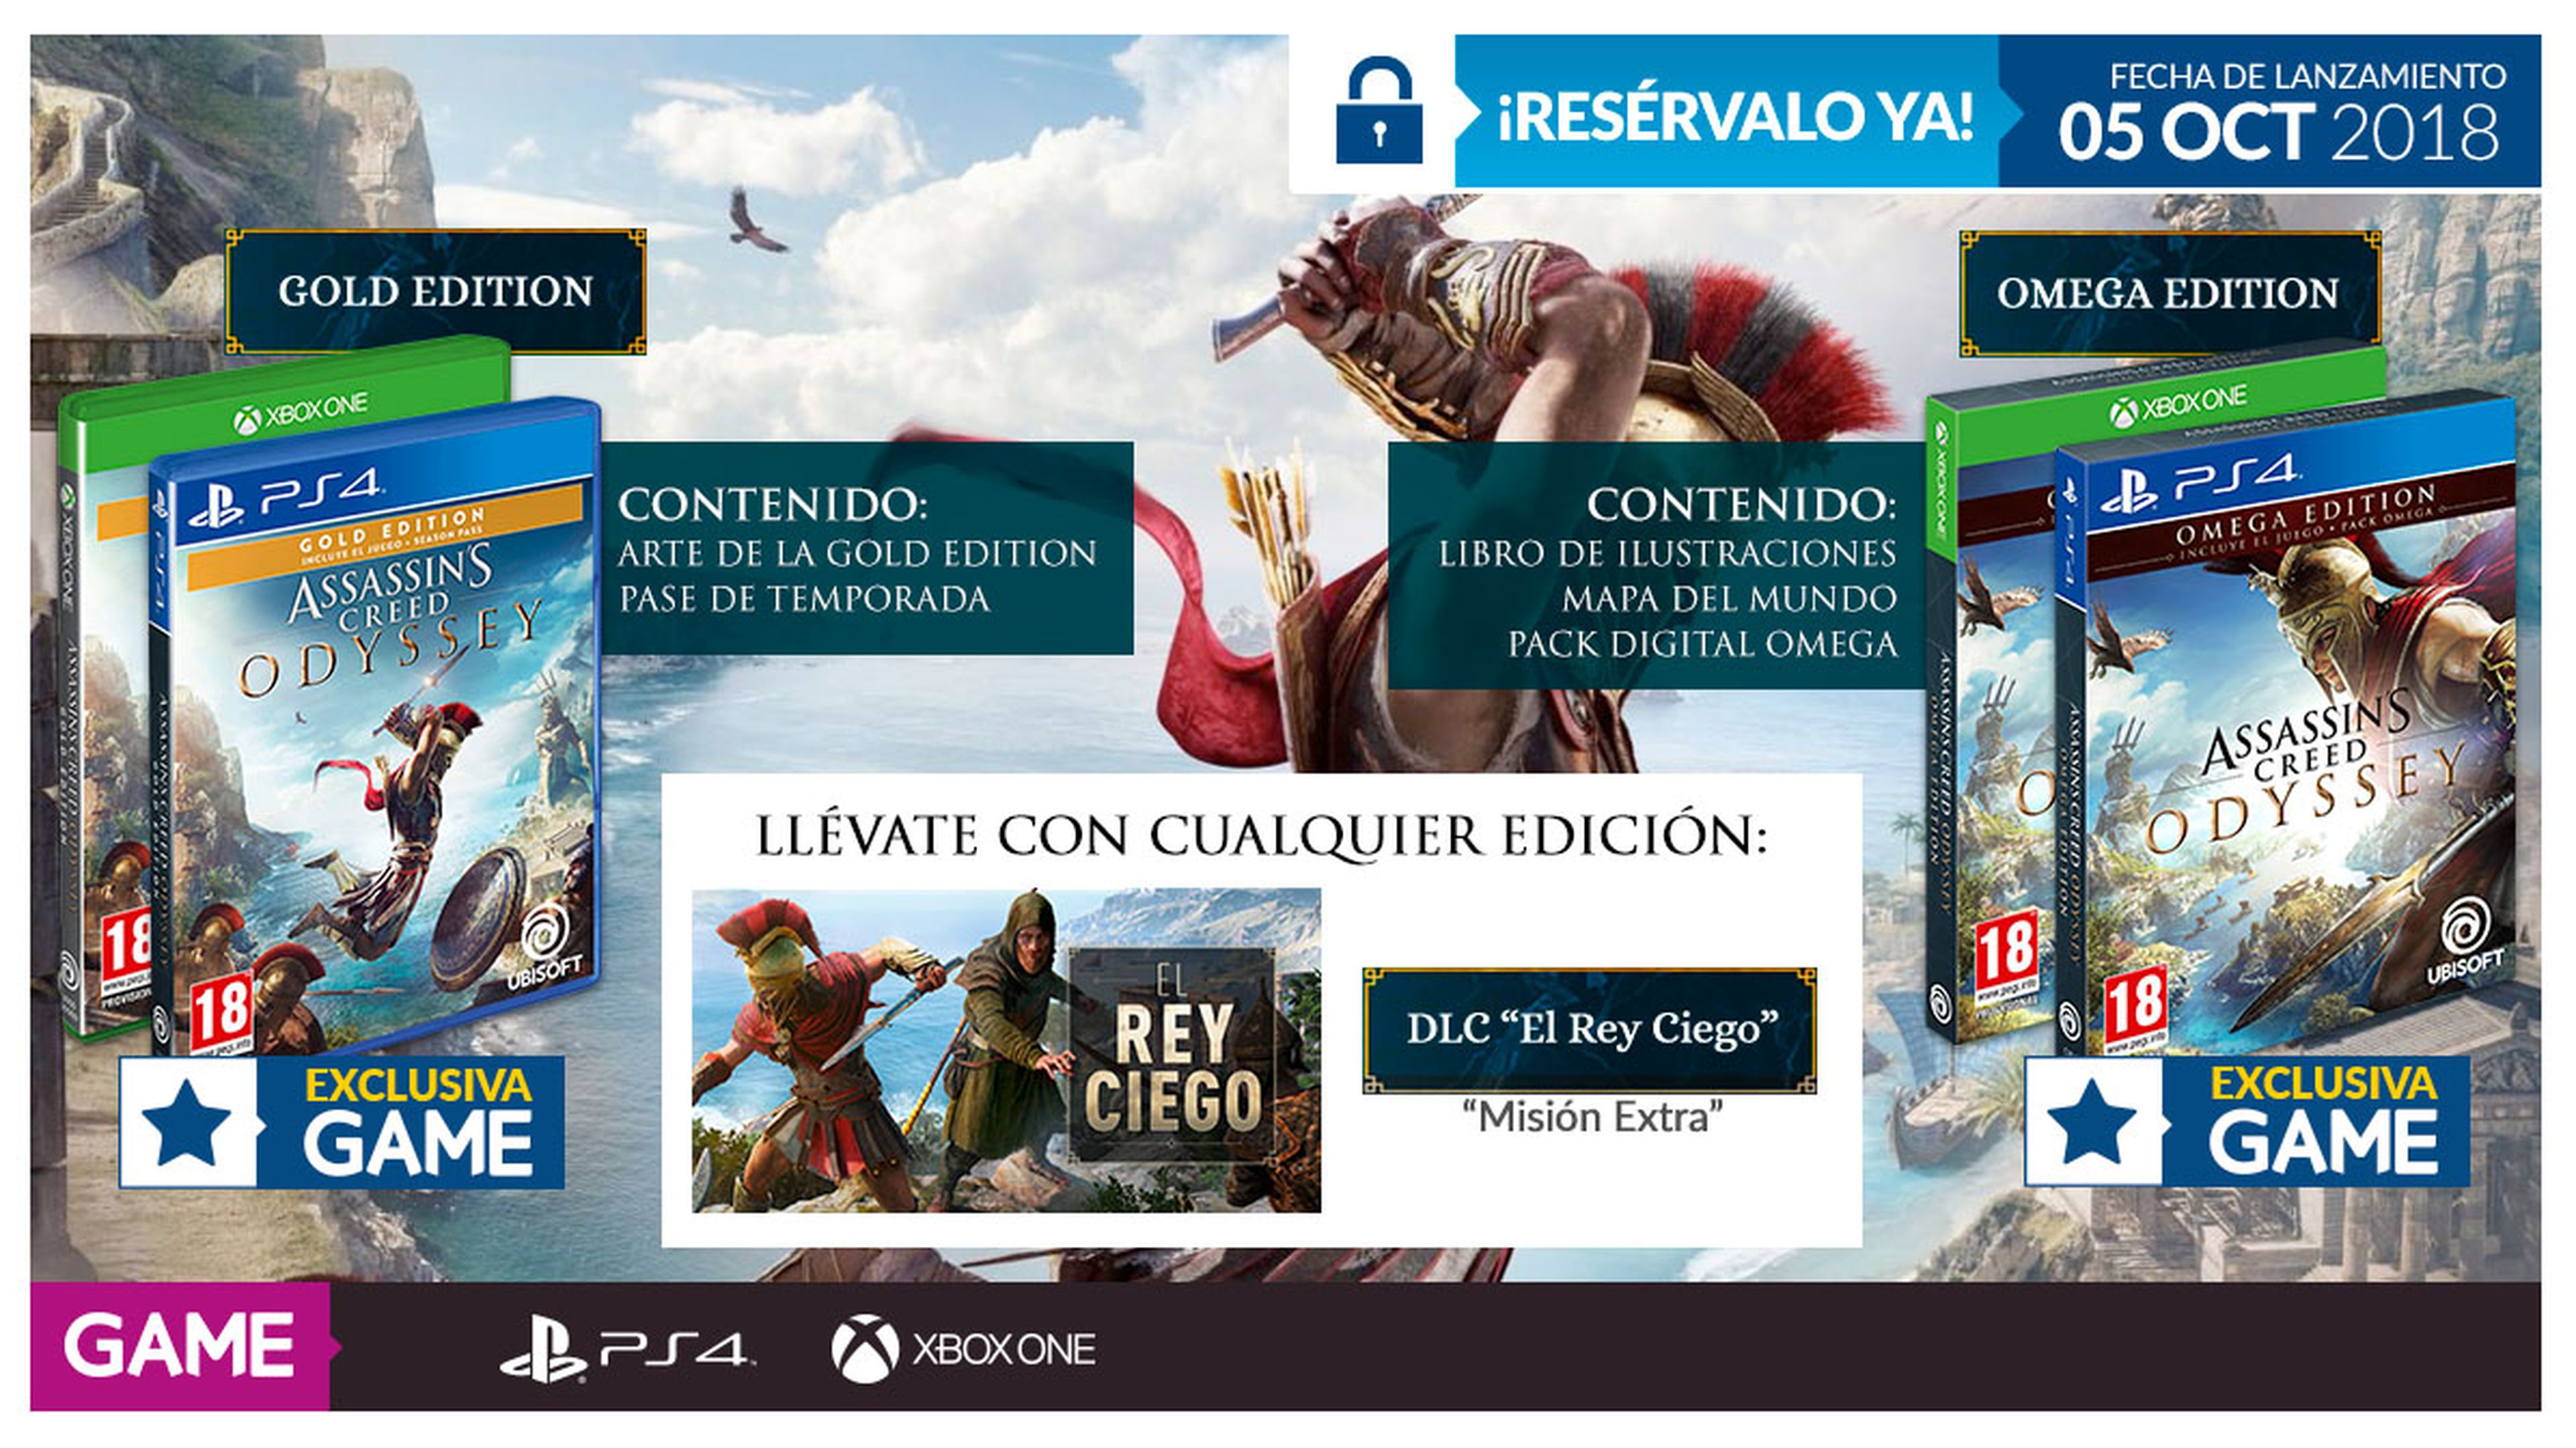 Assassin's Creed Odyssey en GAME